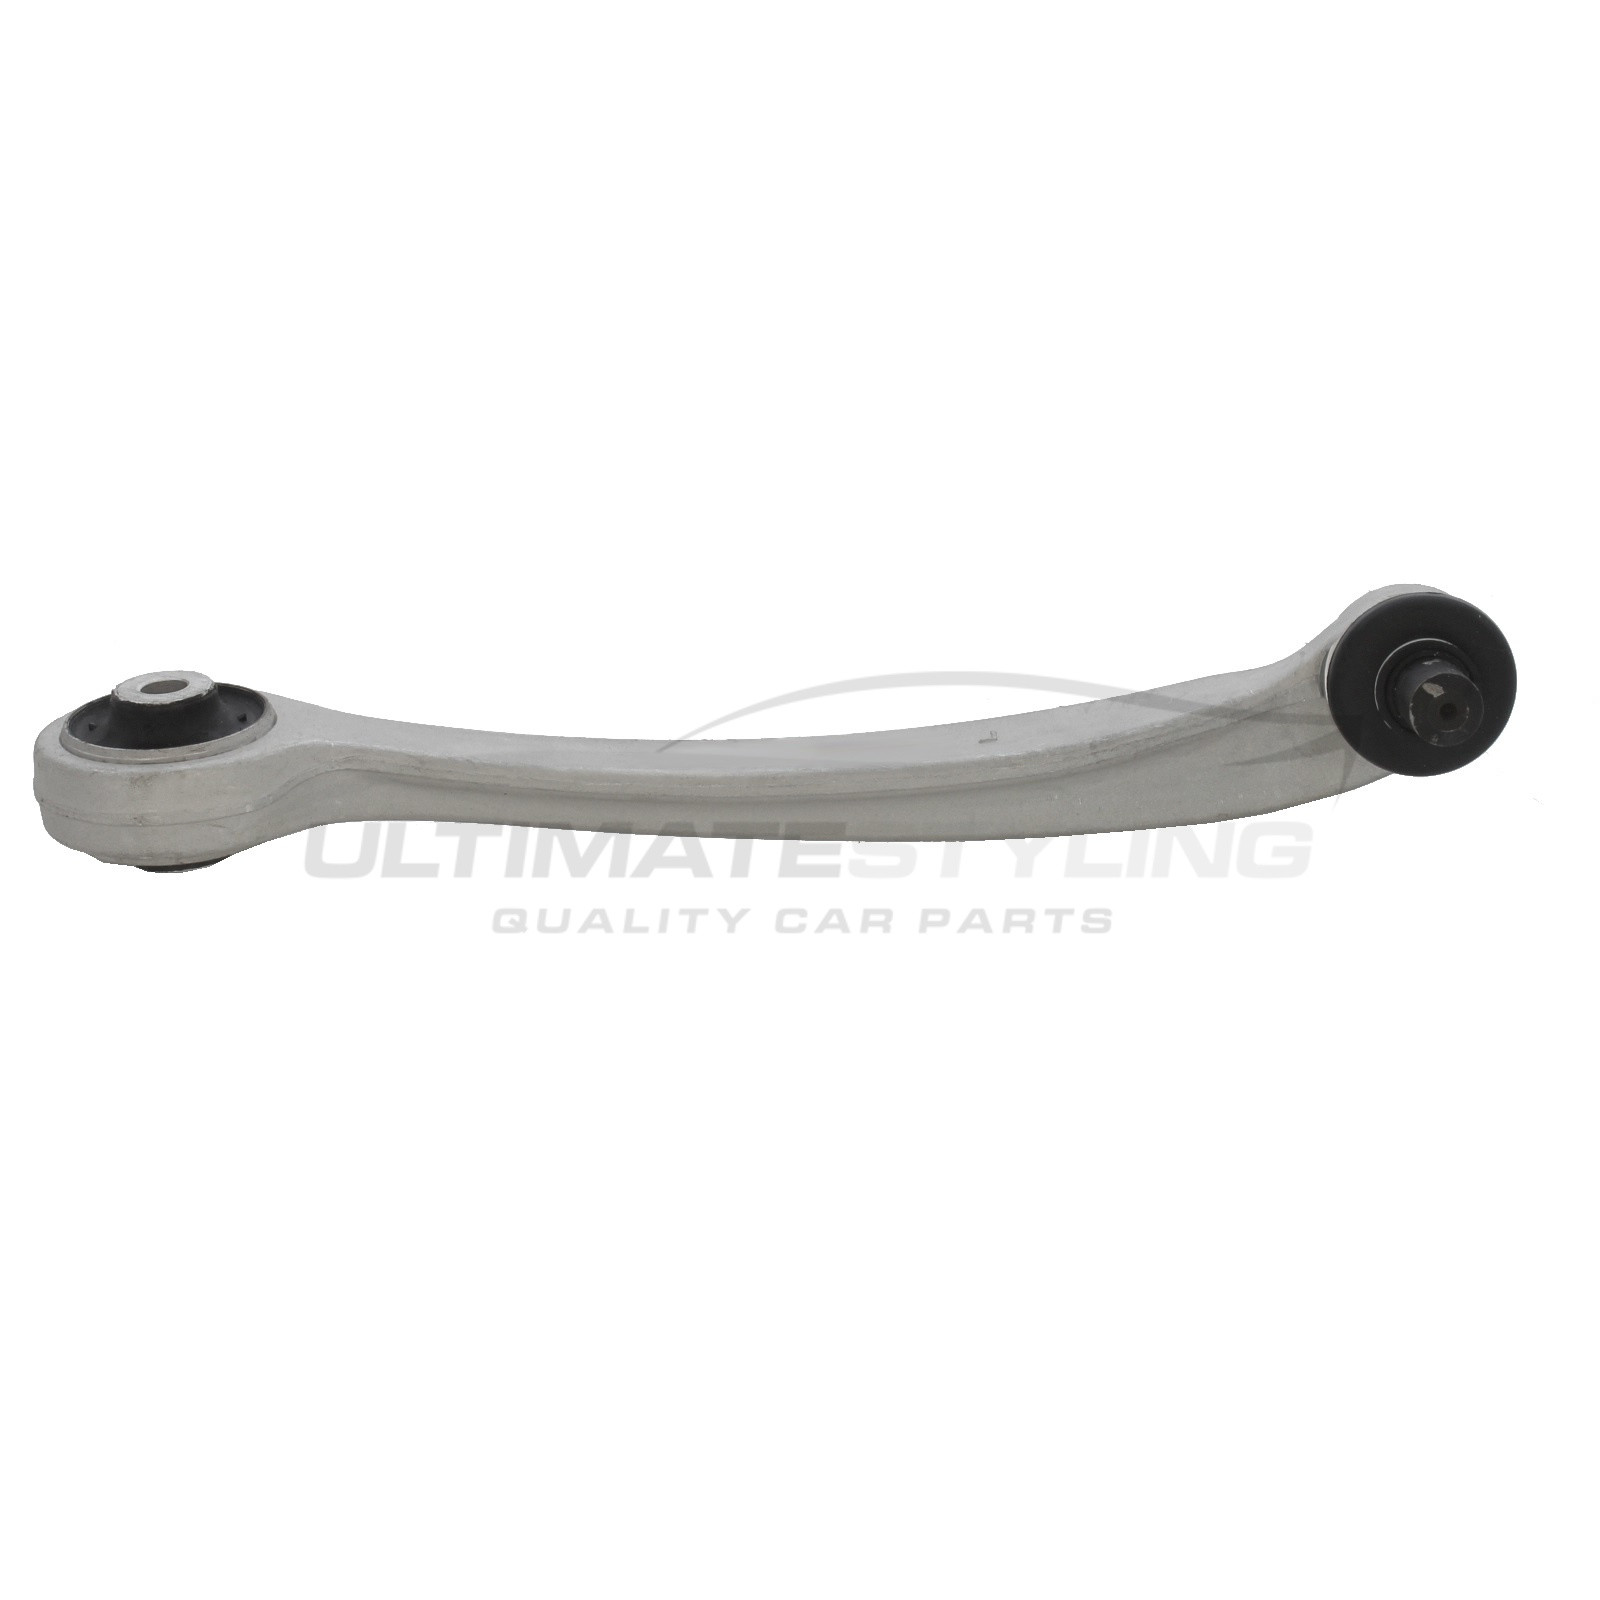 Audi A4, A6, A8, Allroad, RS4, RS6, S4, S6, S8 / Seat Exeo / Skoda Superb / VW Passat Front Upper Suspension Arm Alloy Including 16mm Ball Joint and Rear Bush Front of Wheel Drivers Side Right Hand